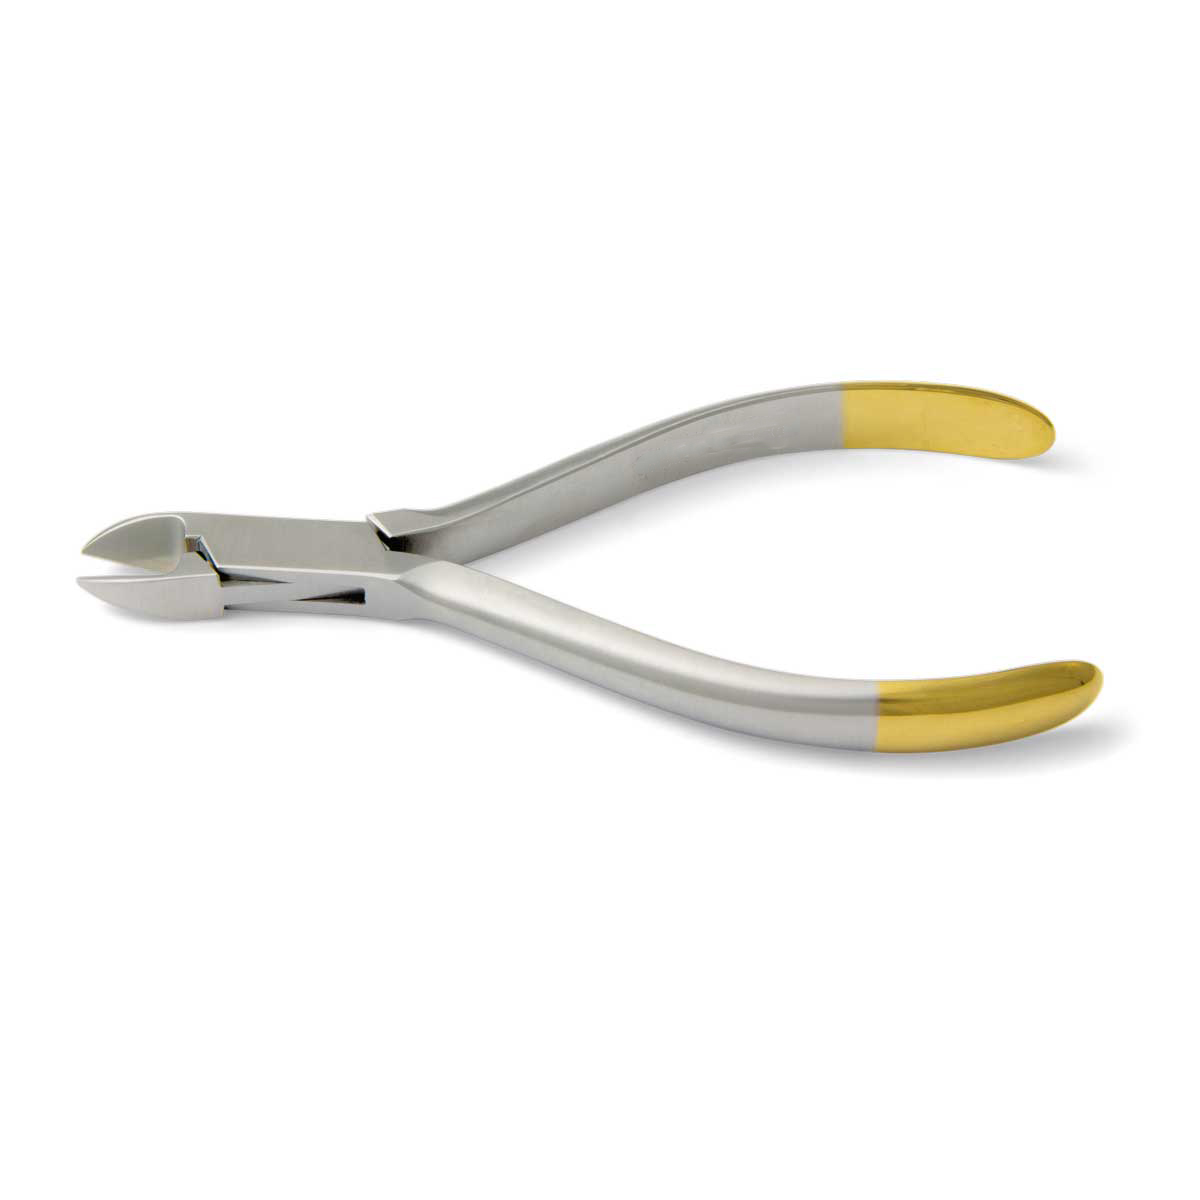 Cutters-distal and cutters with tungsten carbide inserts